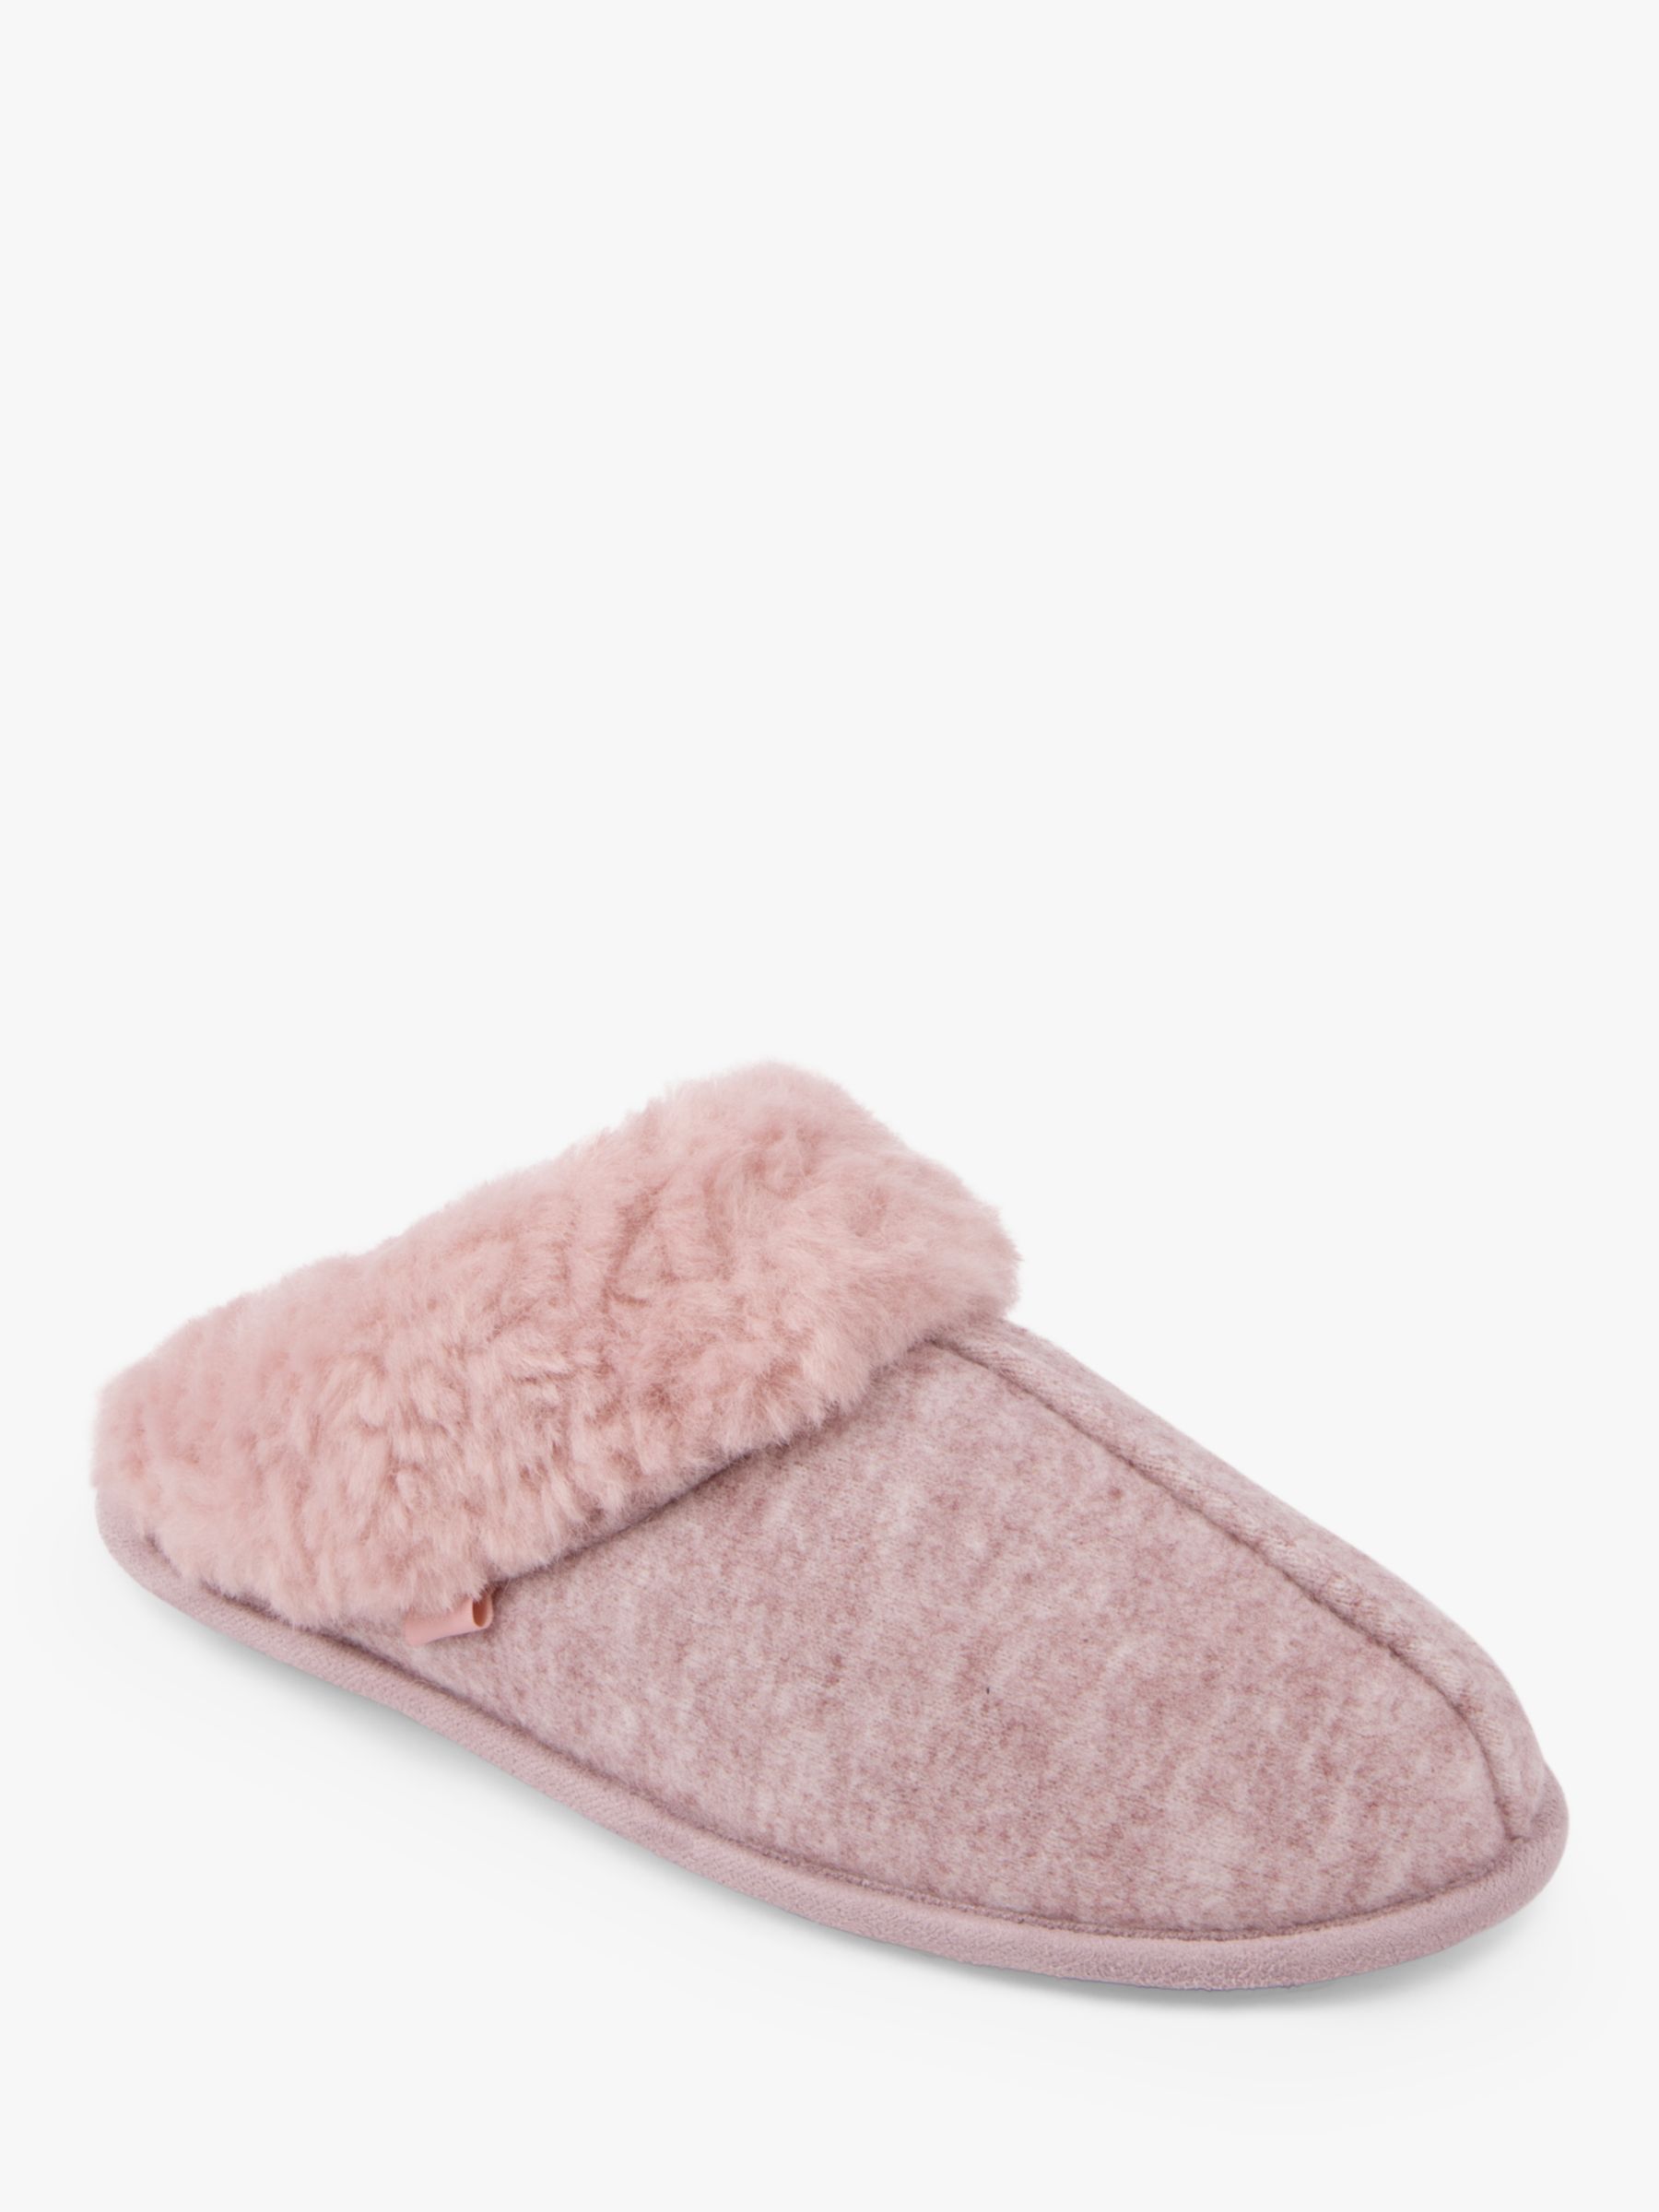 totes Knitted Mule Slippers, Pink at John Lewis & Partners